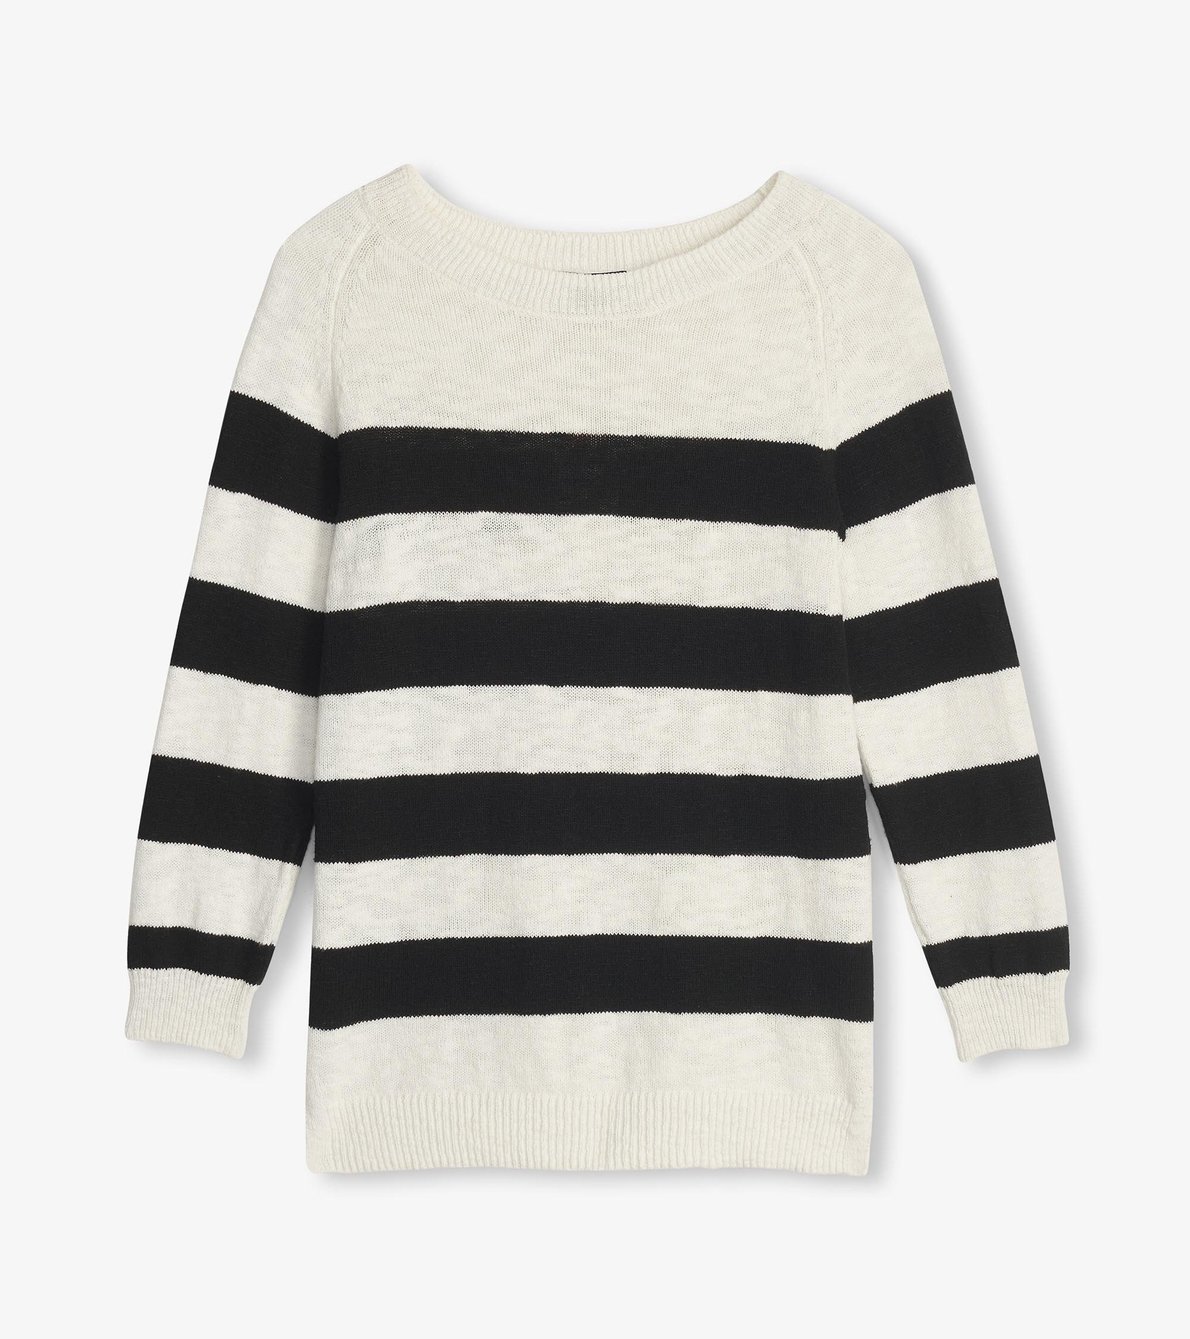 View larger image of Mariner Sweater - Black Stripes